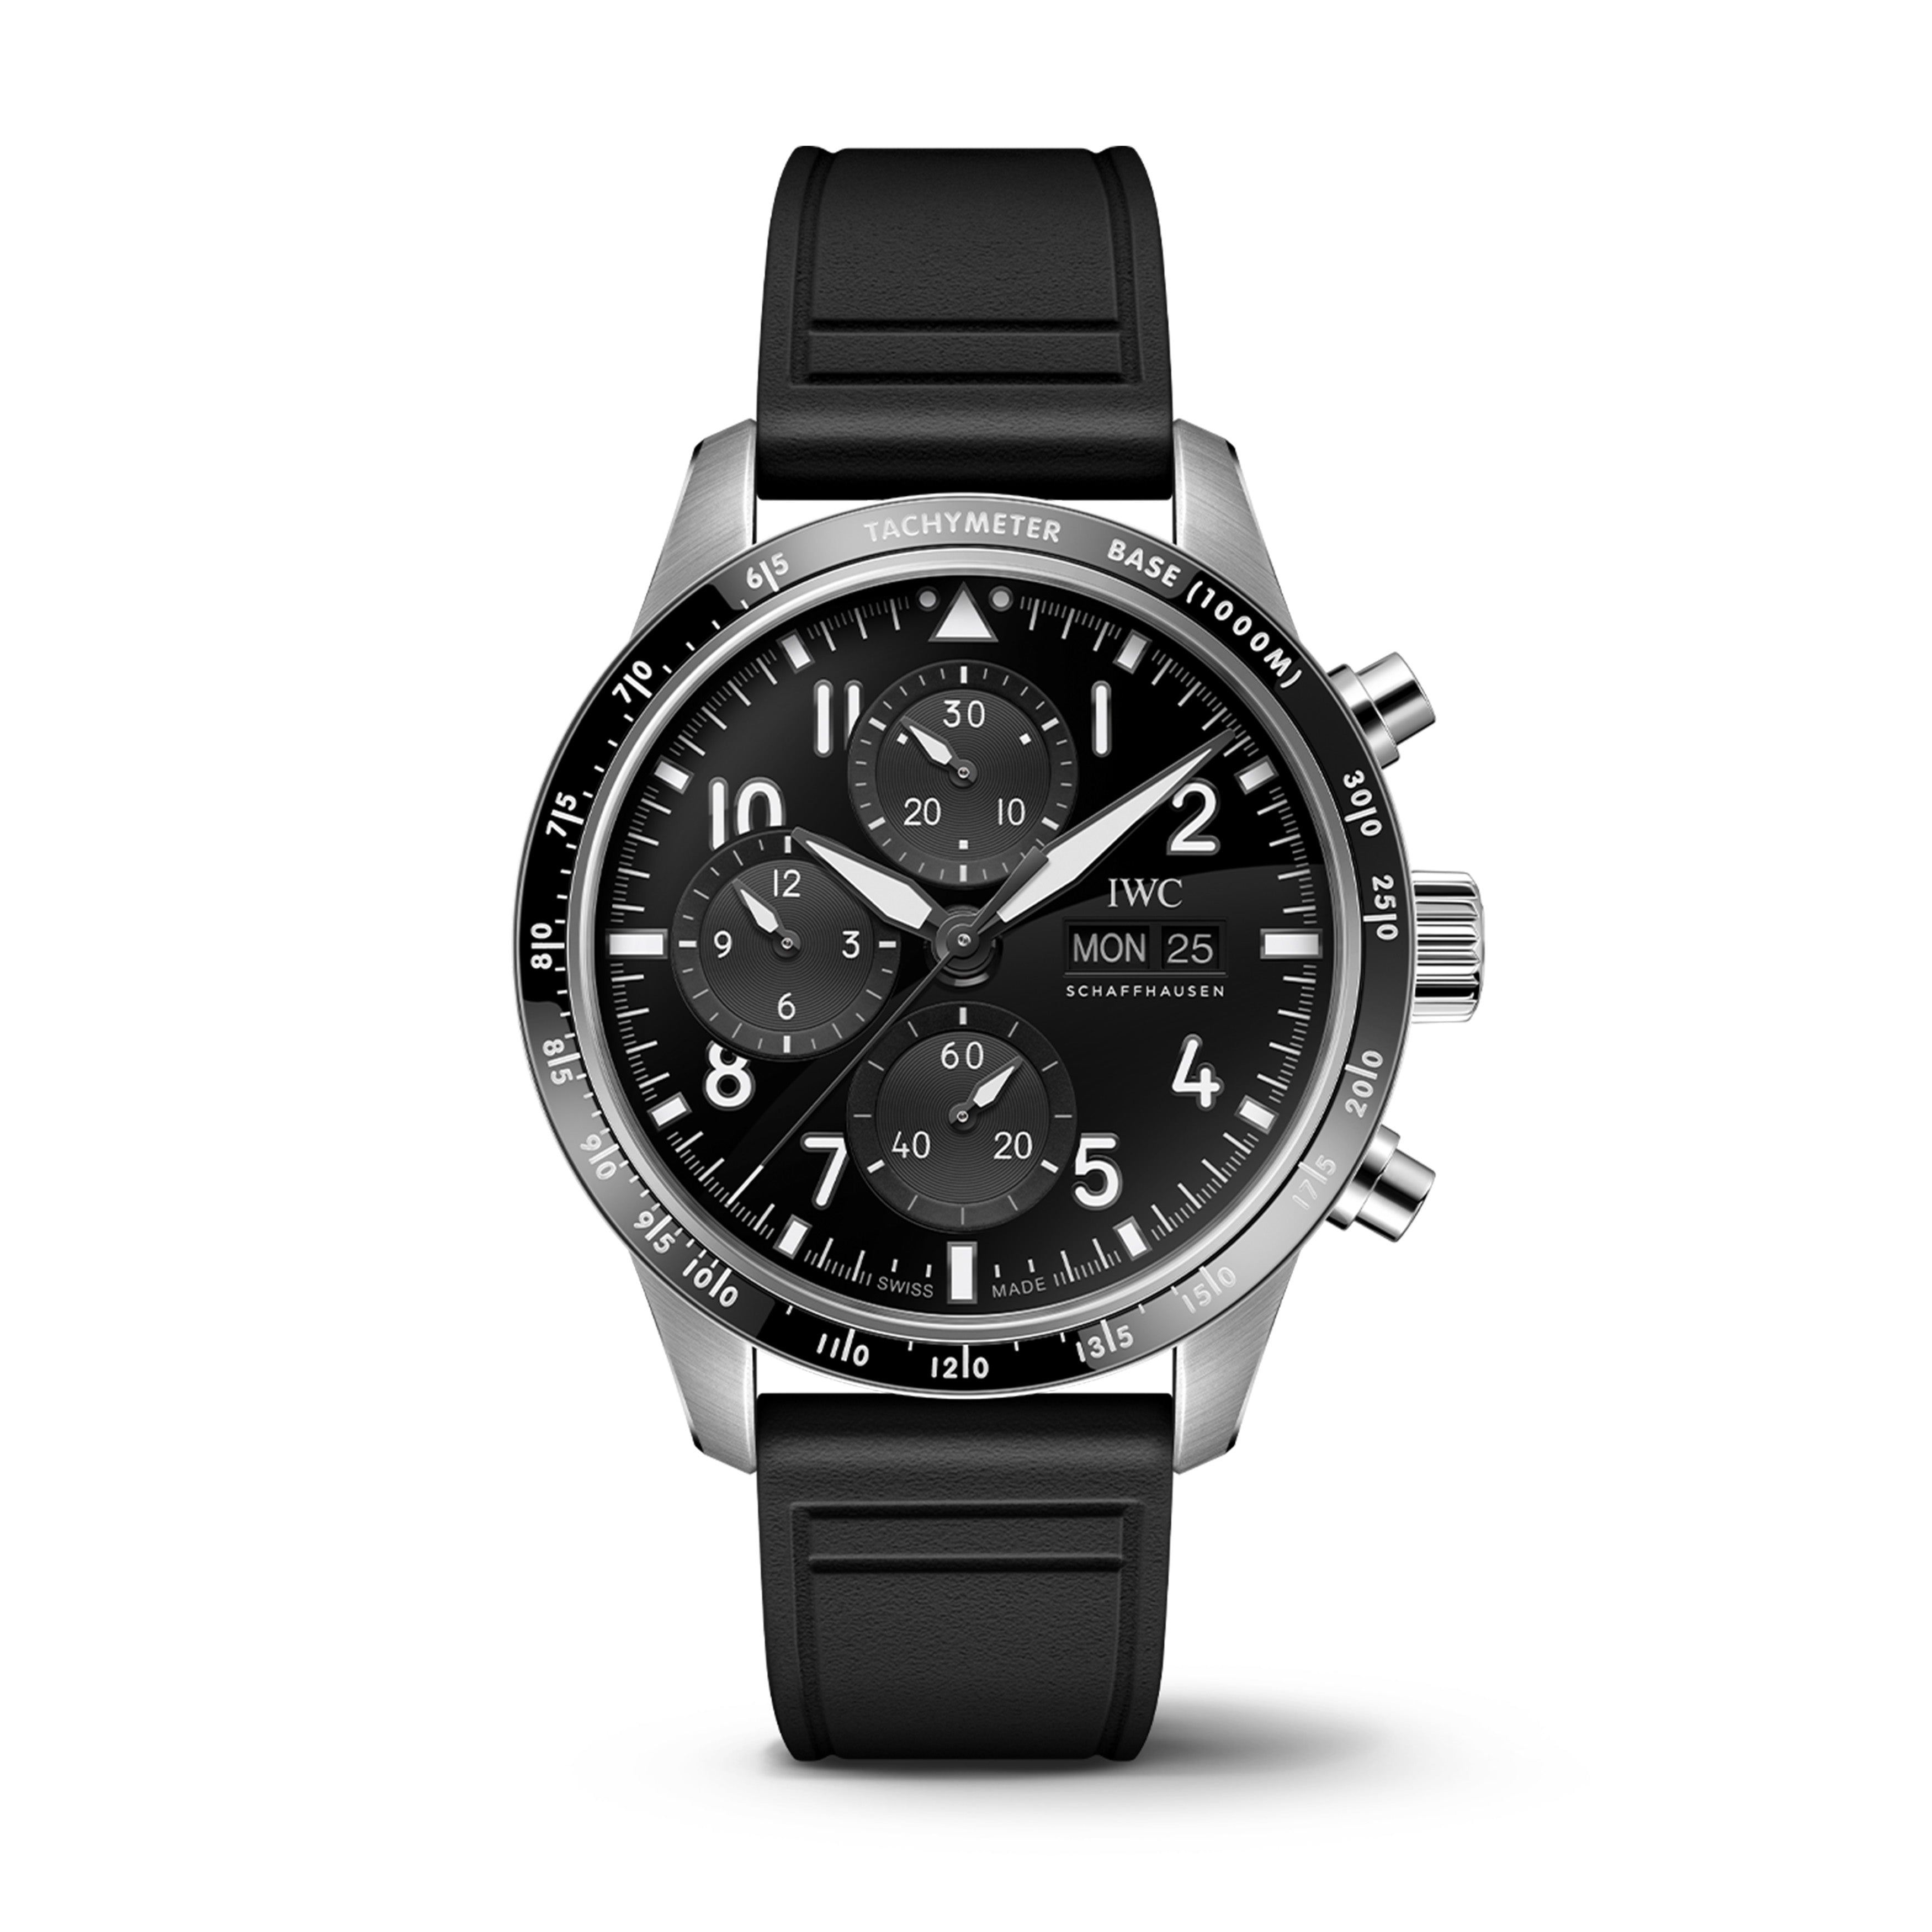 IWC  Pilot's Watch Performance Chronograph 41 AMG Watch, 41mm Black Dial, IW388305